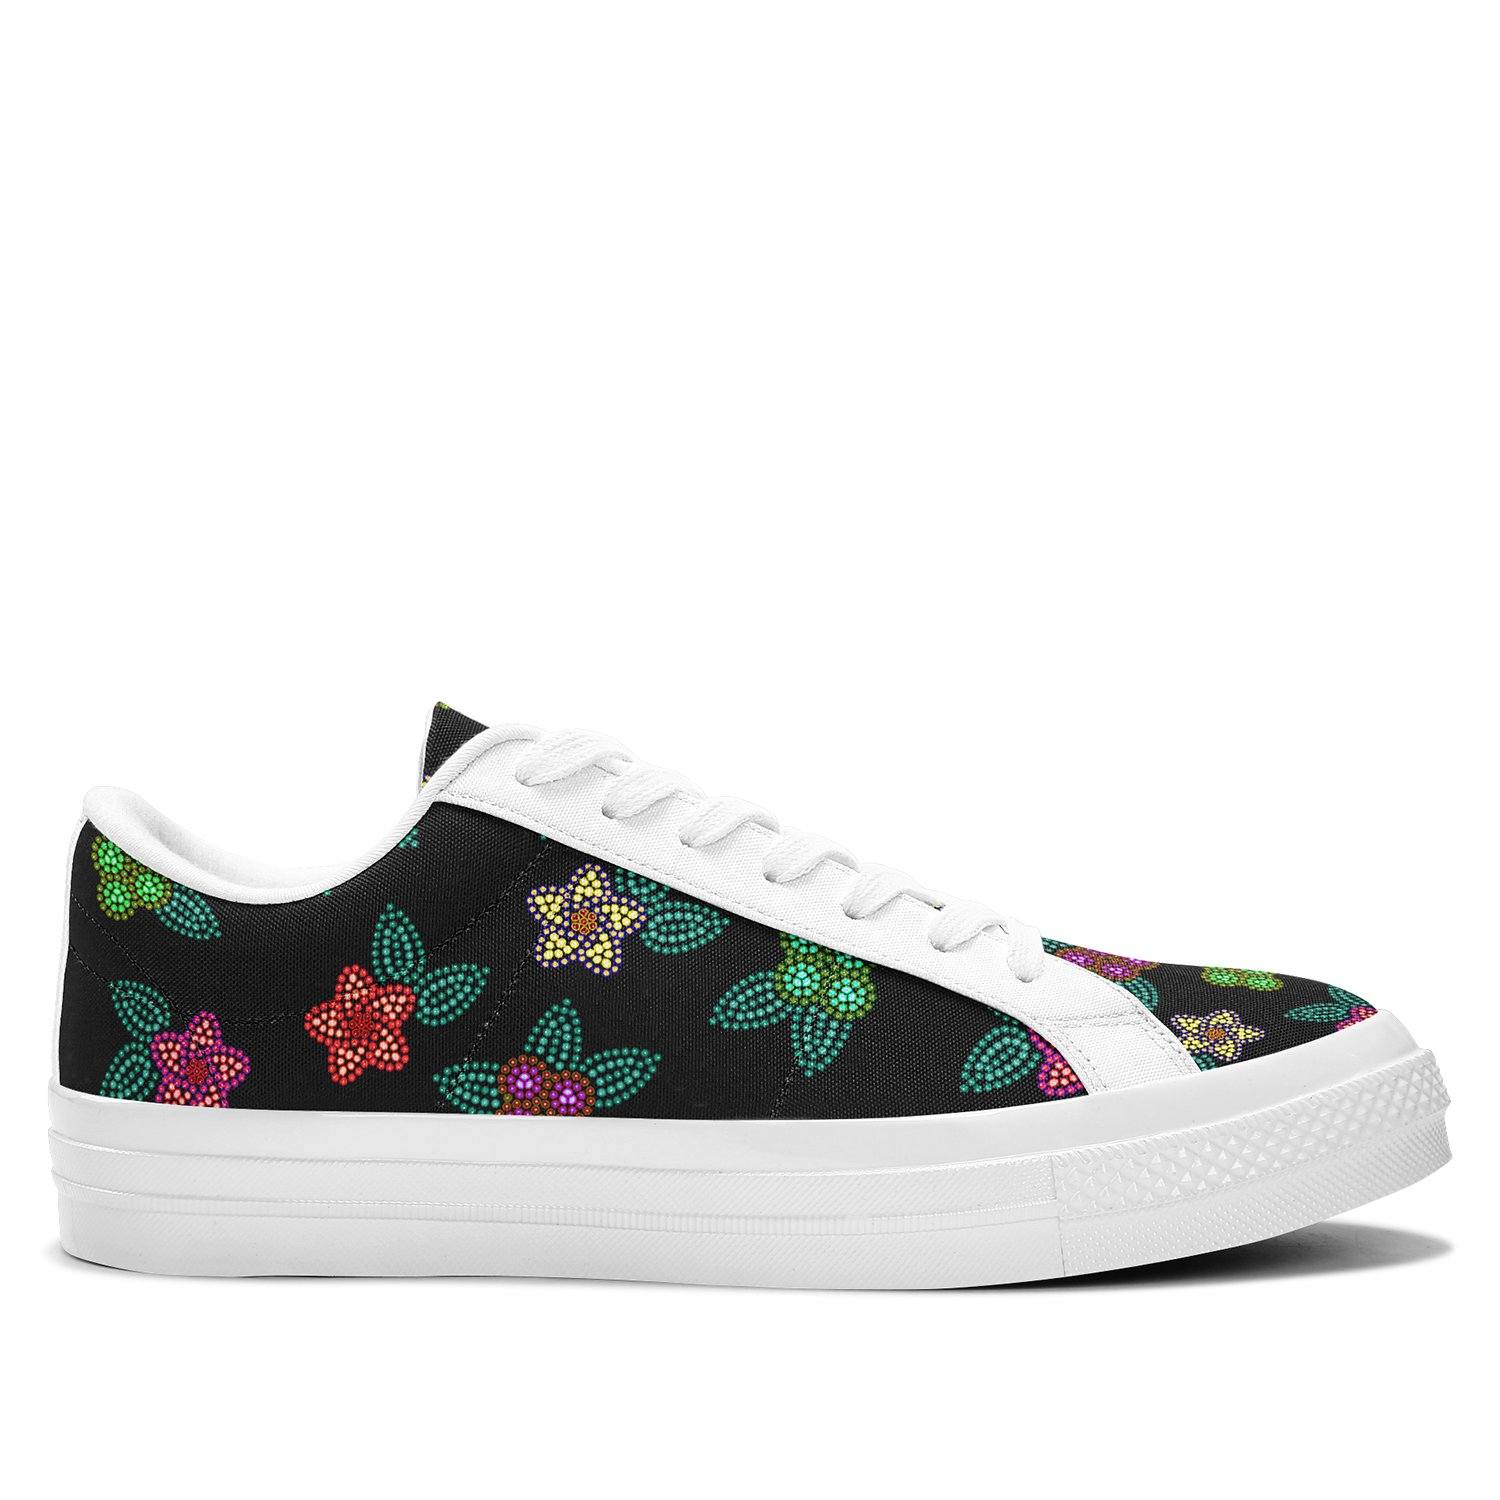 Berry Flowers Black Aapisi Low Top Canvas Shoes White Sole aapisi Herman 